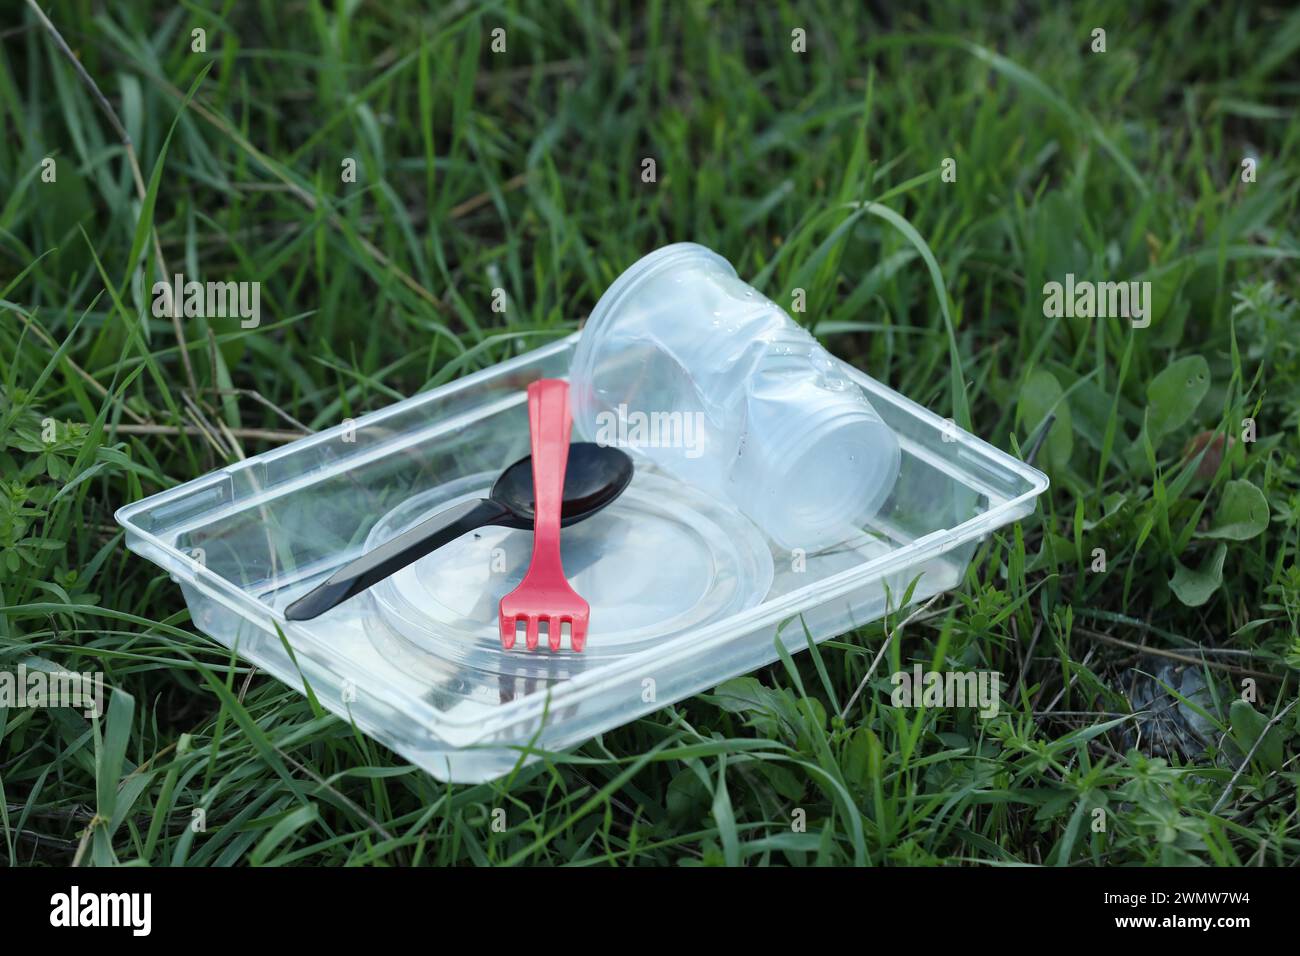 Used plastic tableware on grass outdoors. Environmental pollution concept Stock Photo